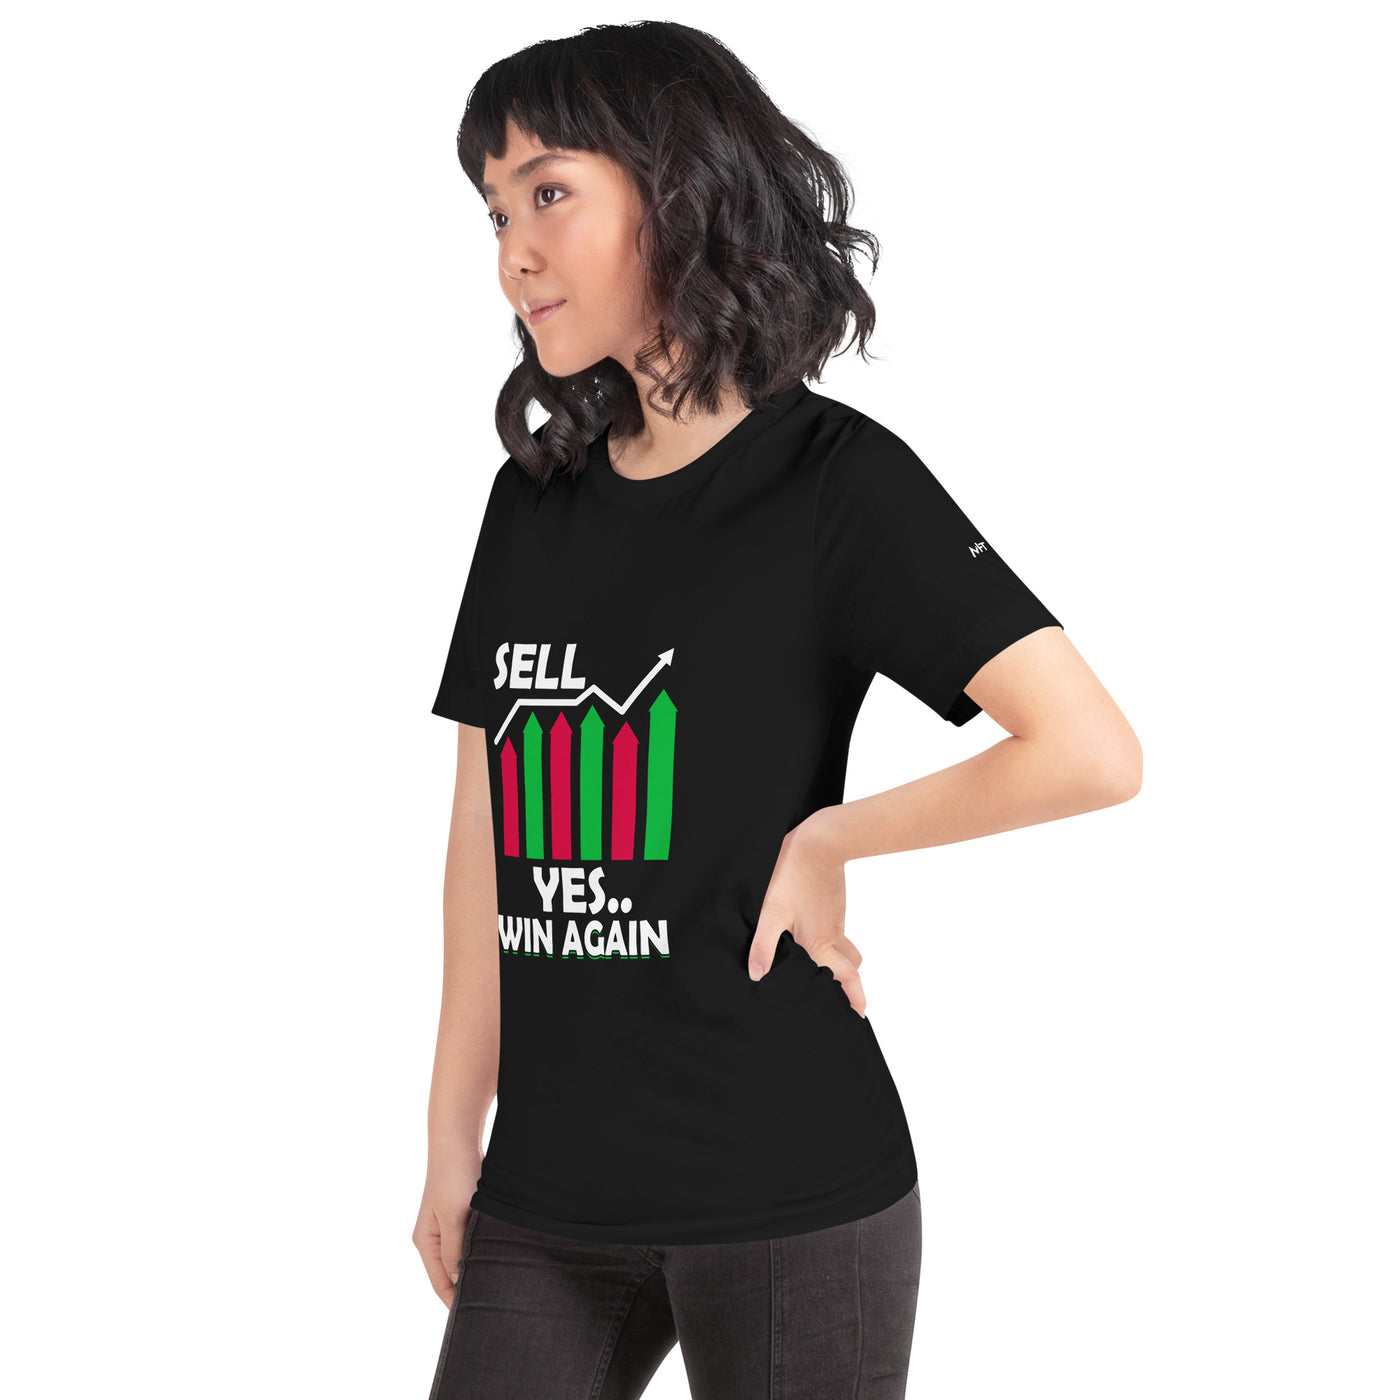 Sell: Yes..Win again! - Unisex t-shirt